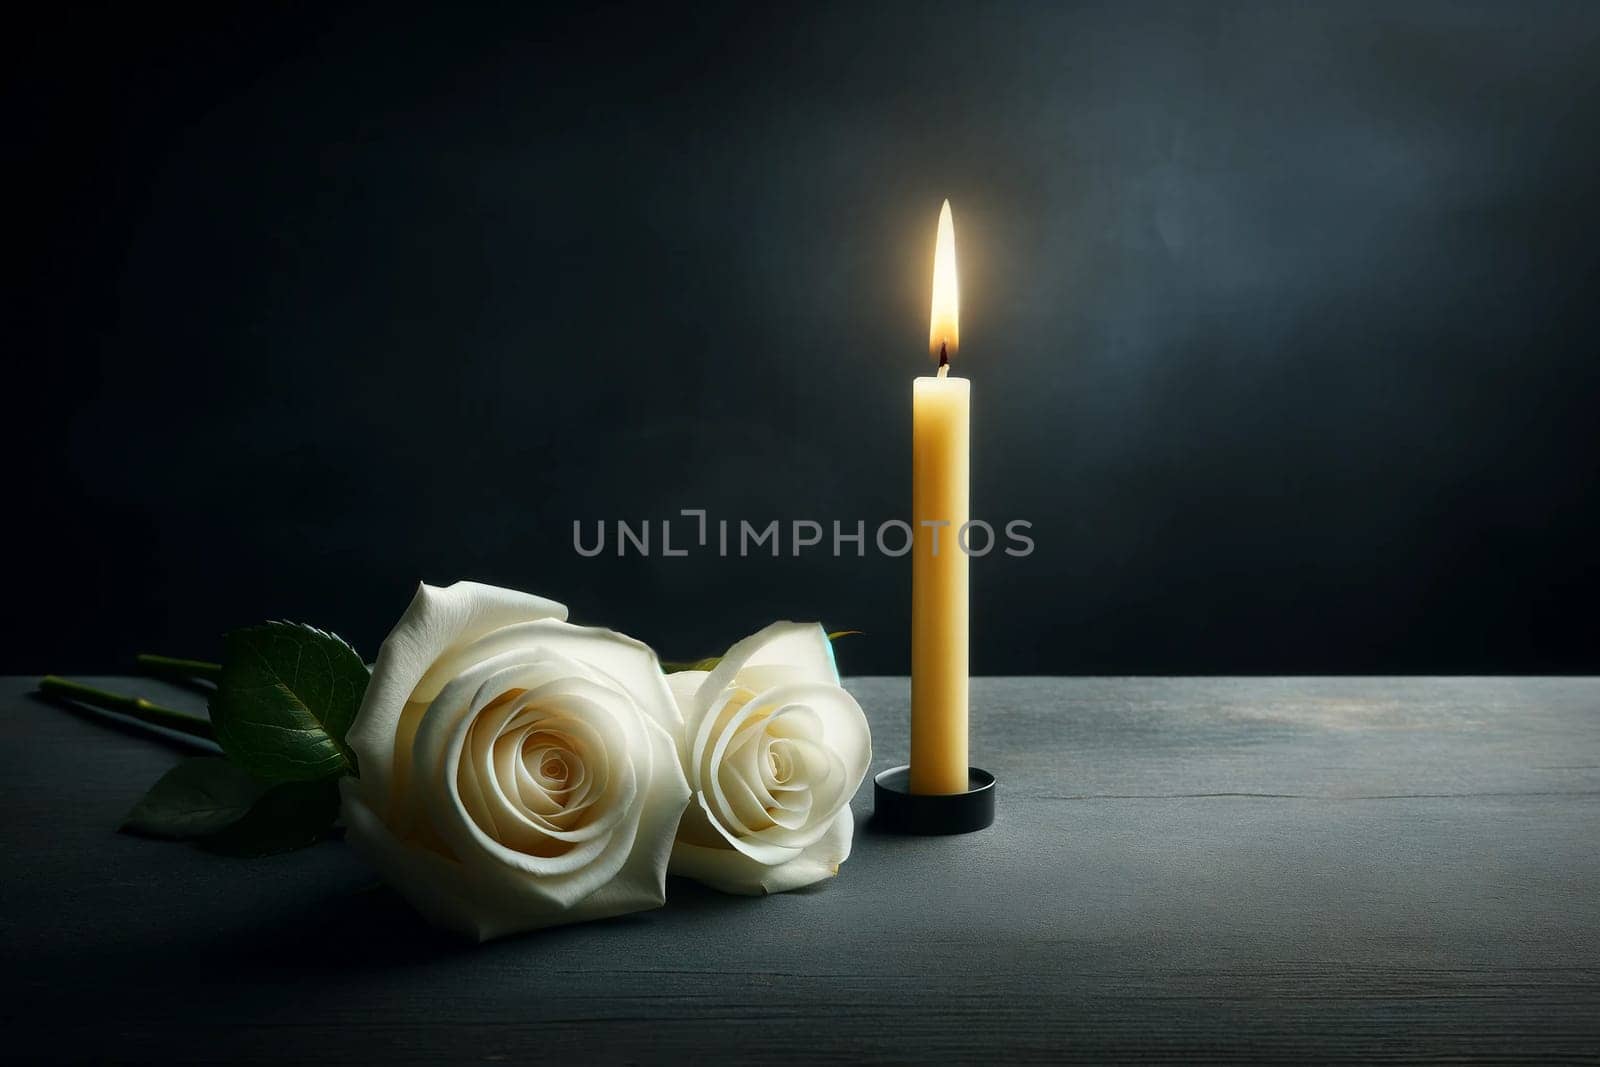 a thin yellow wax candle and two white roses as a symbol of memory, mourning and respect by Annado